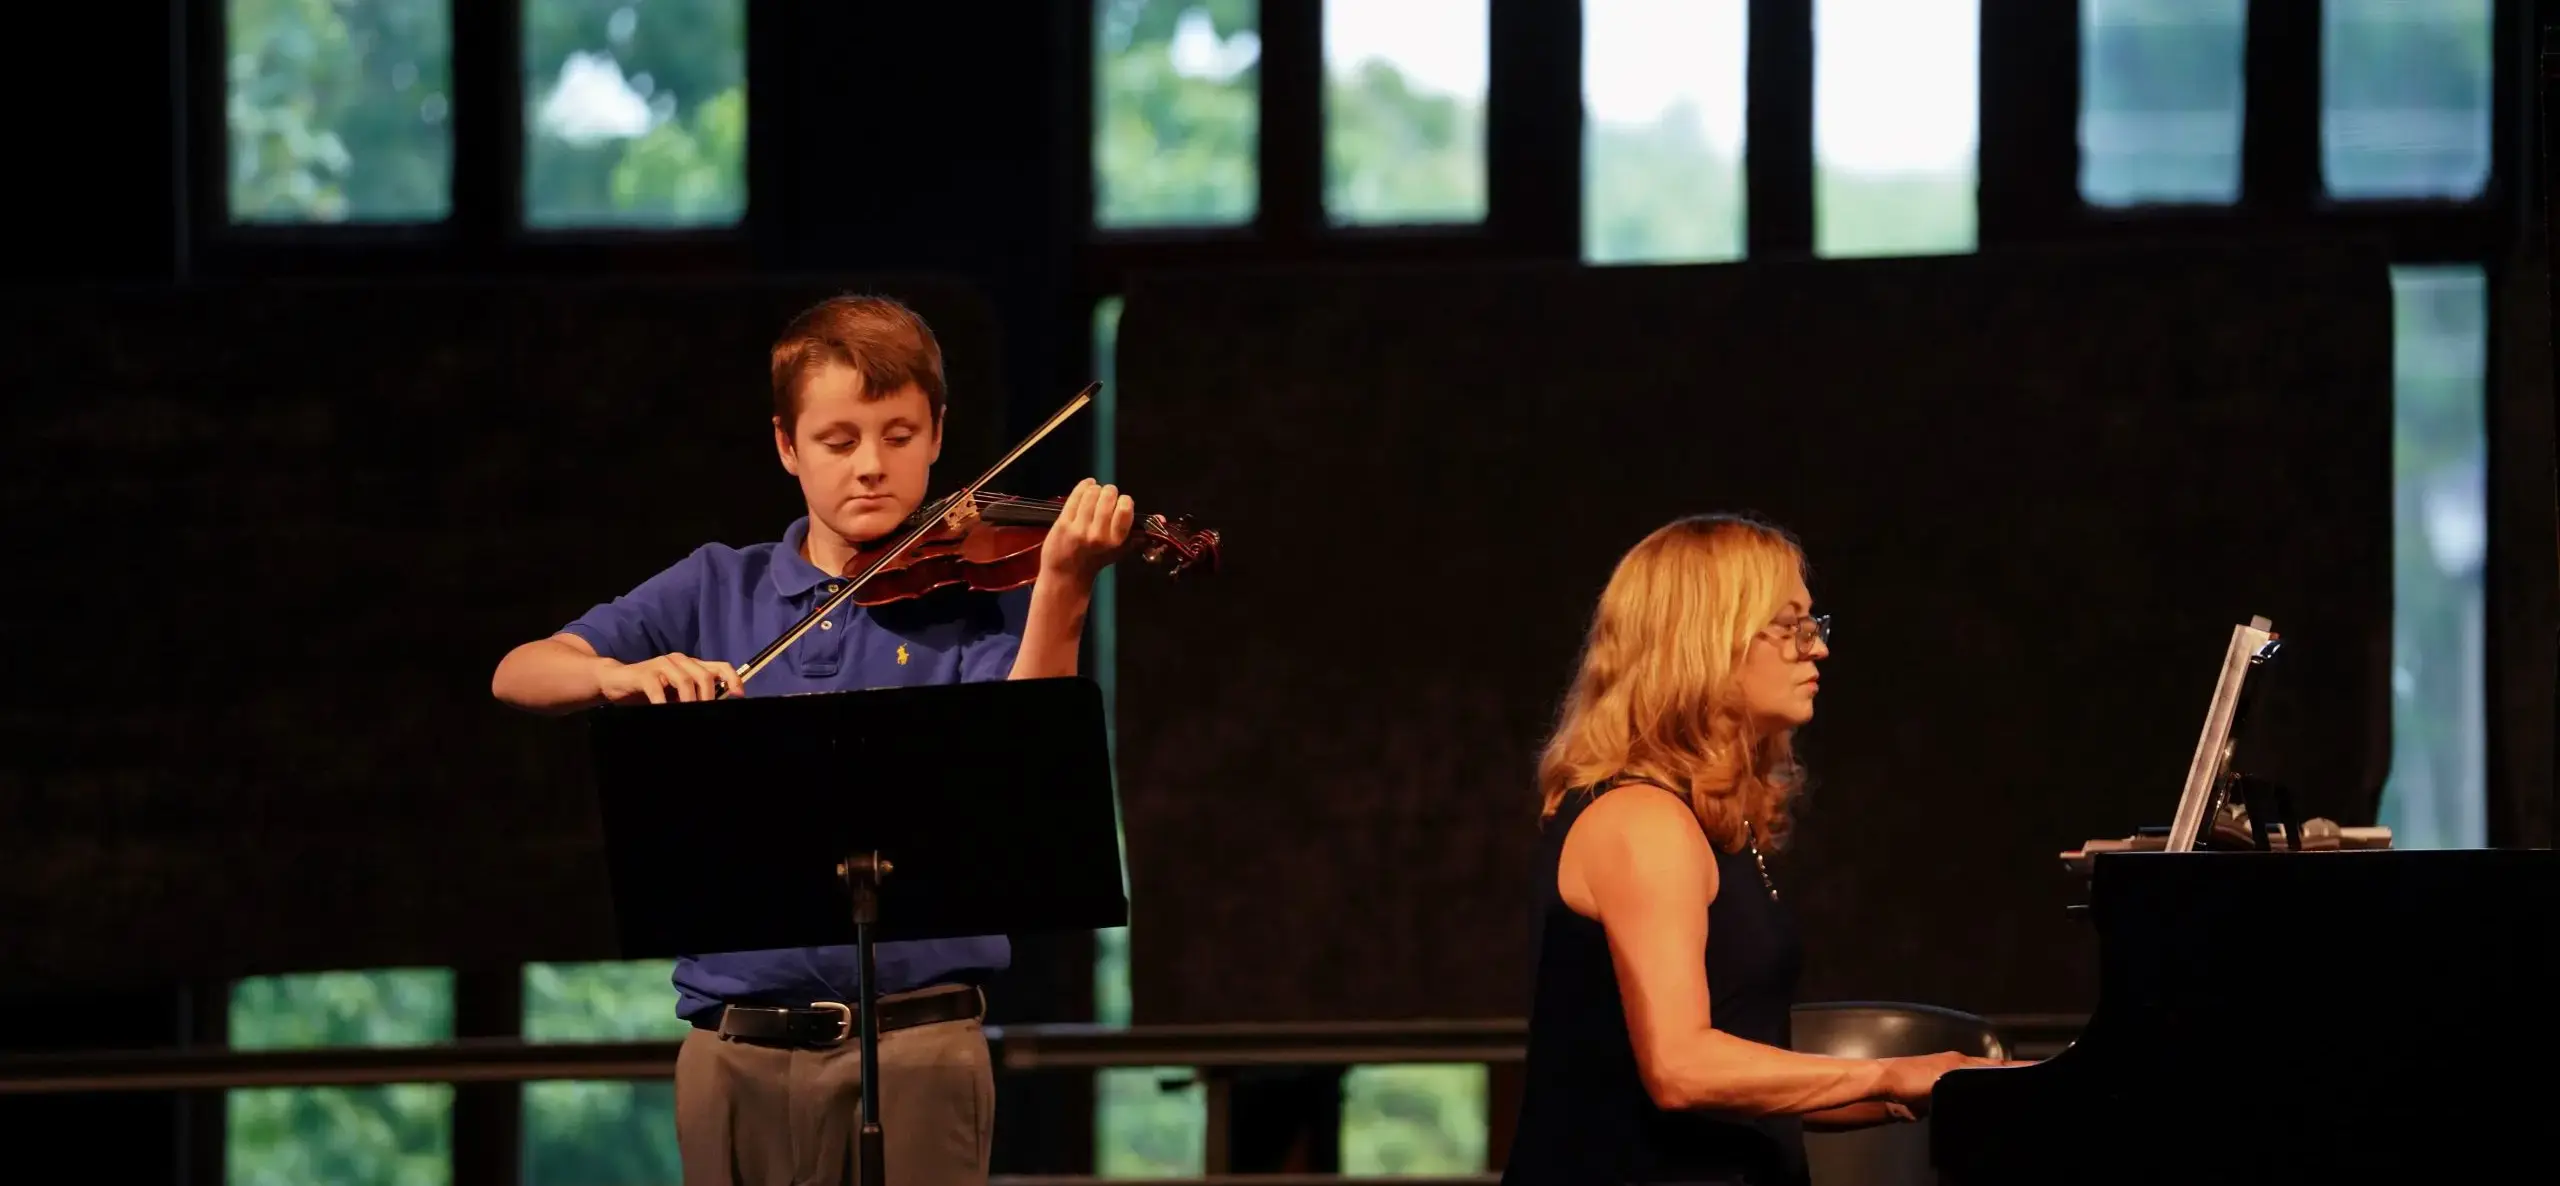 Two students performing onstage, one at the piano and one with a violin